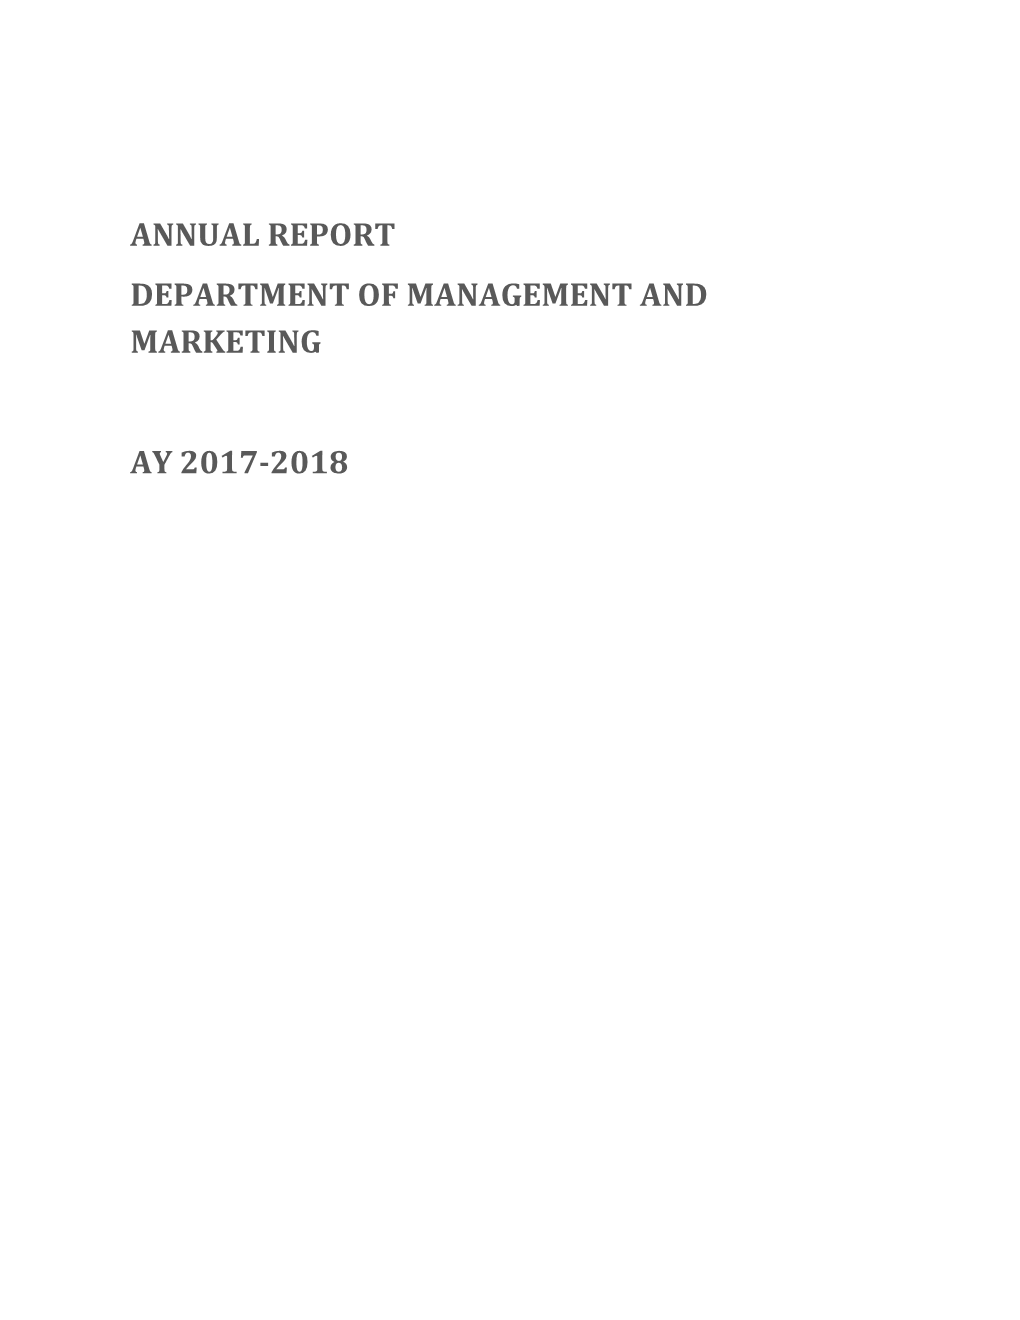 Annual Report Department of Management and Marketing